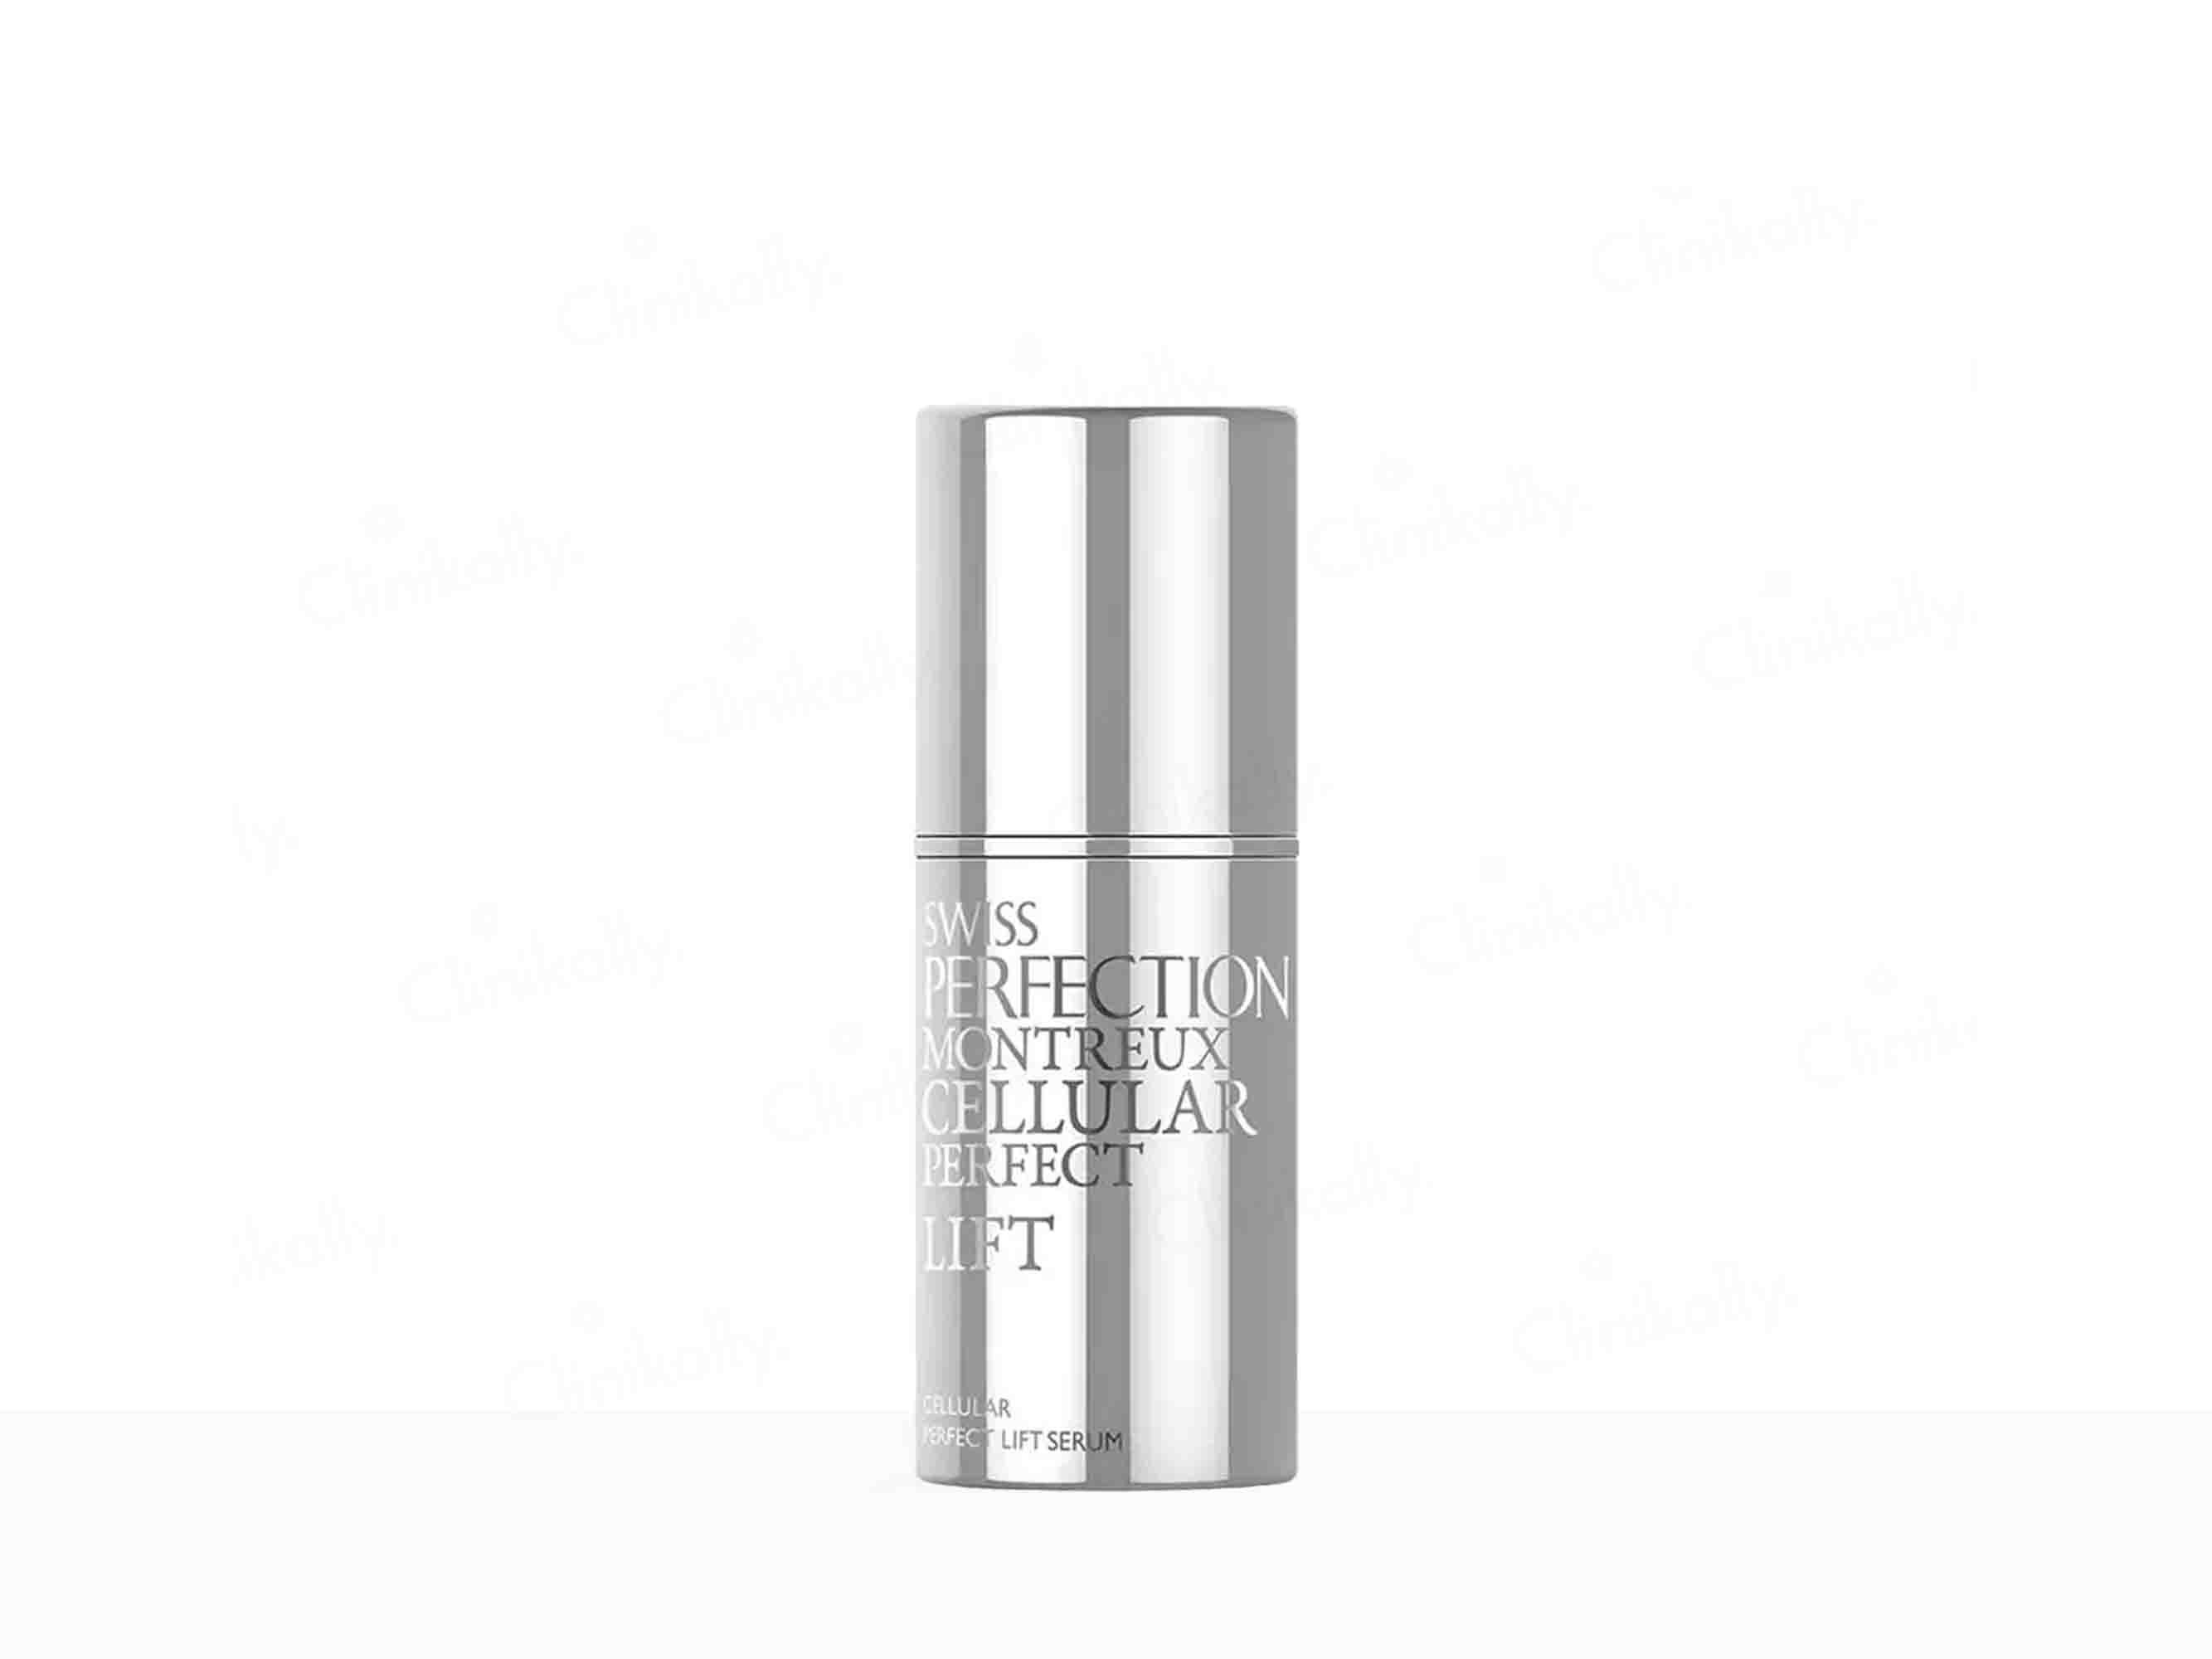 Swiss Perfection Montreux Cellular Perfect Lift Skin Serum